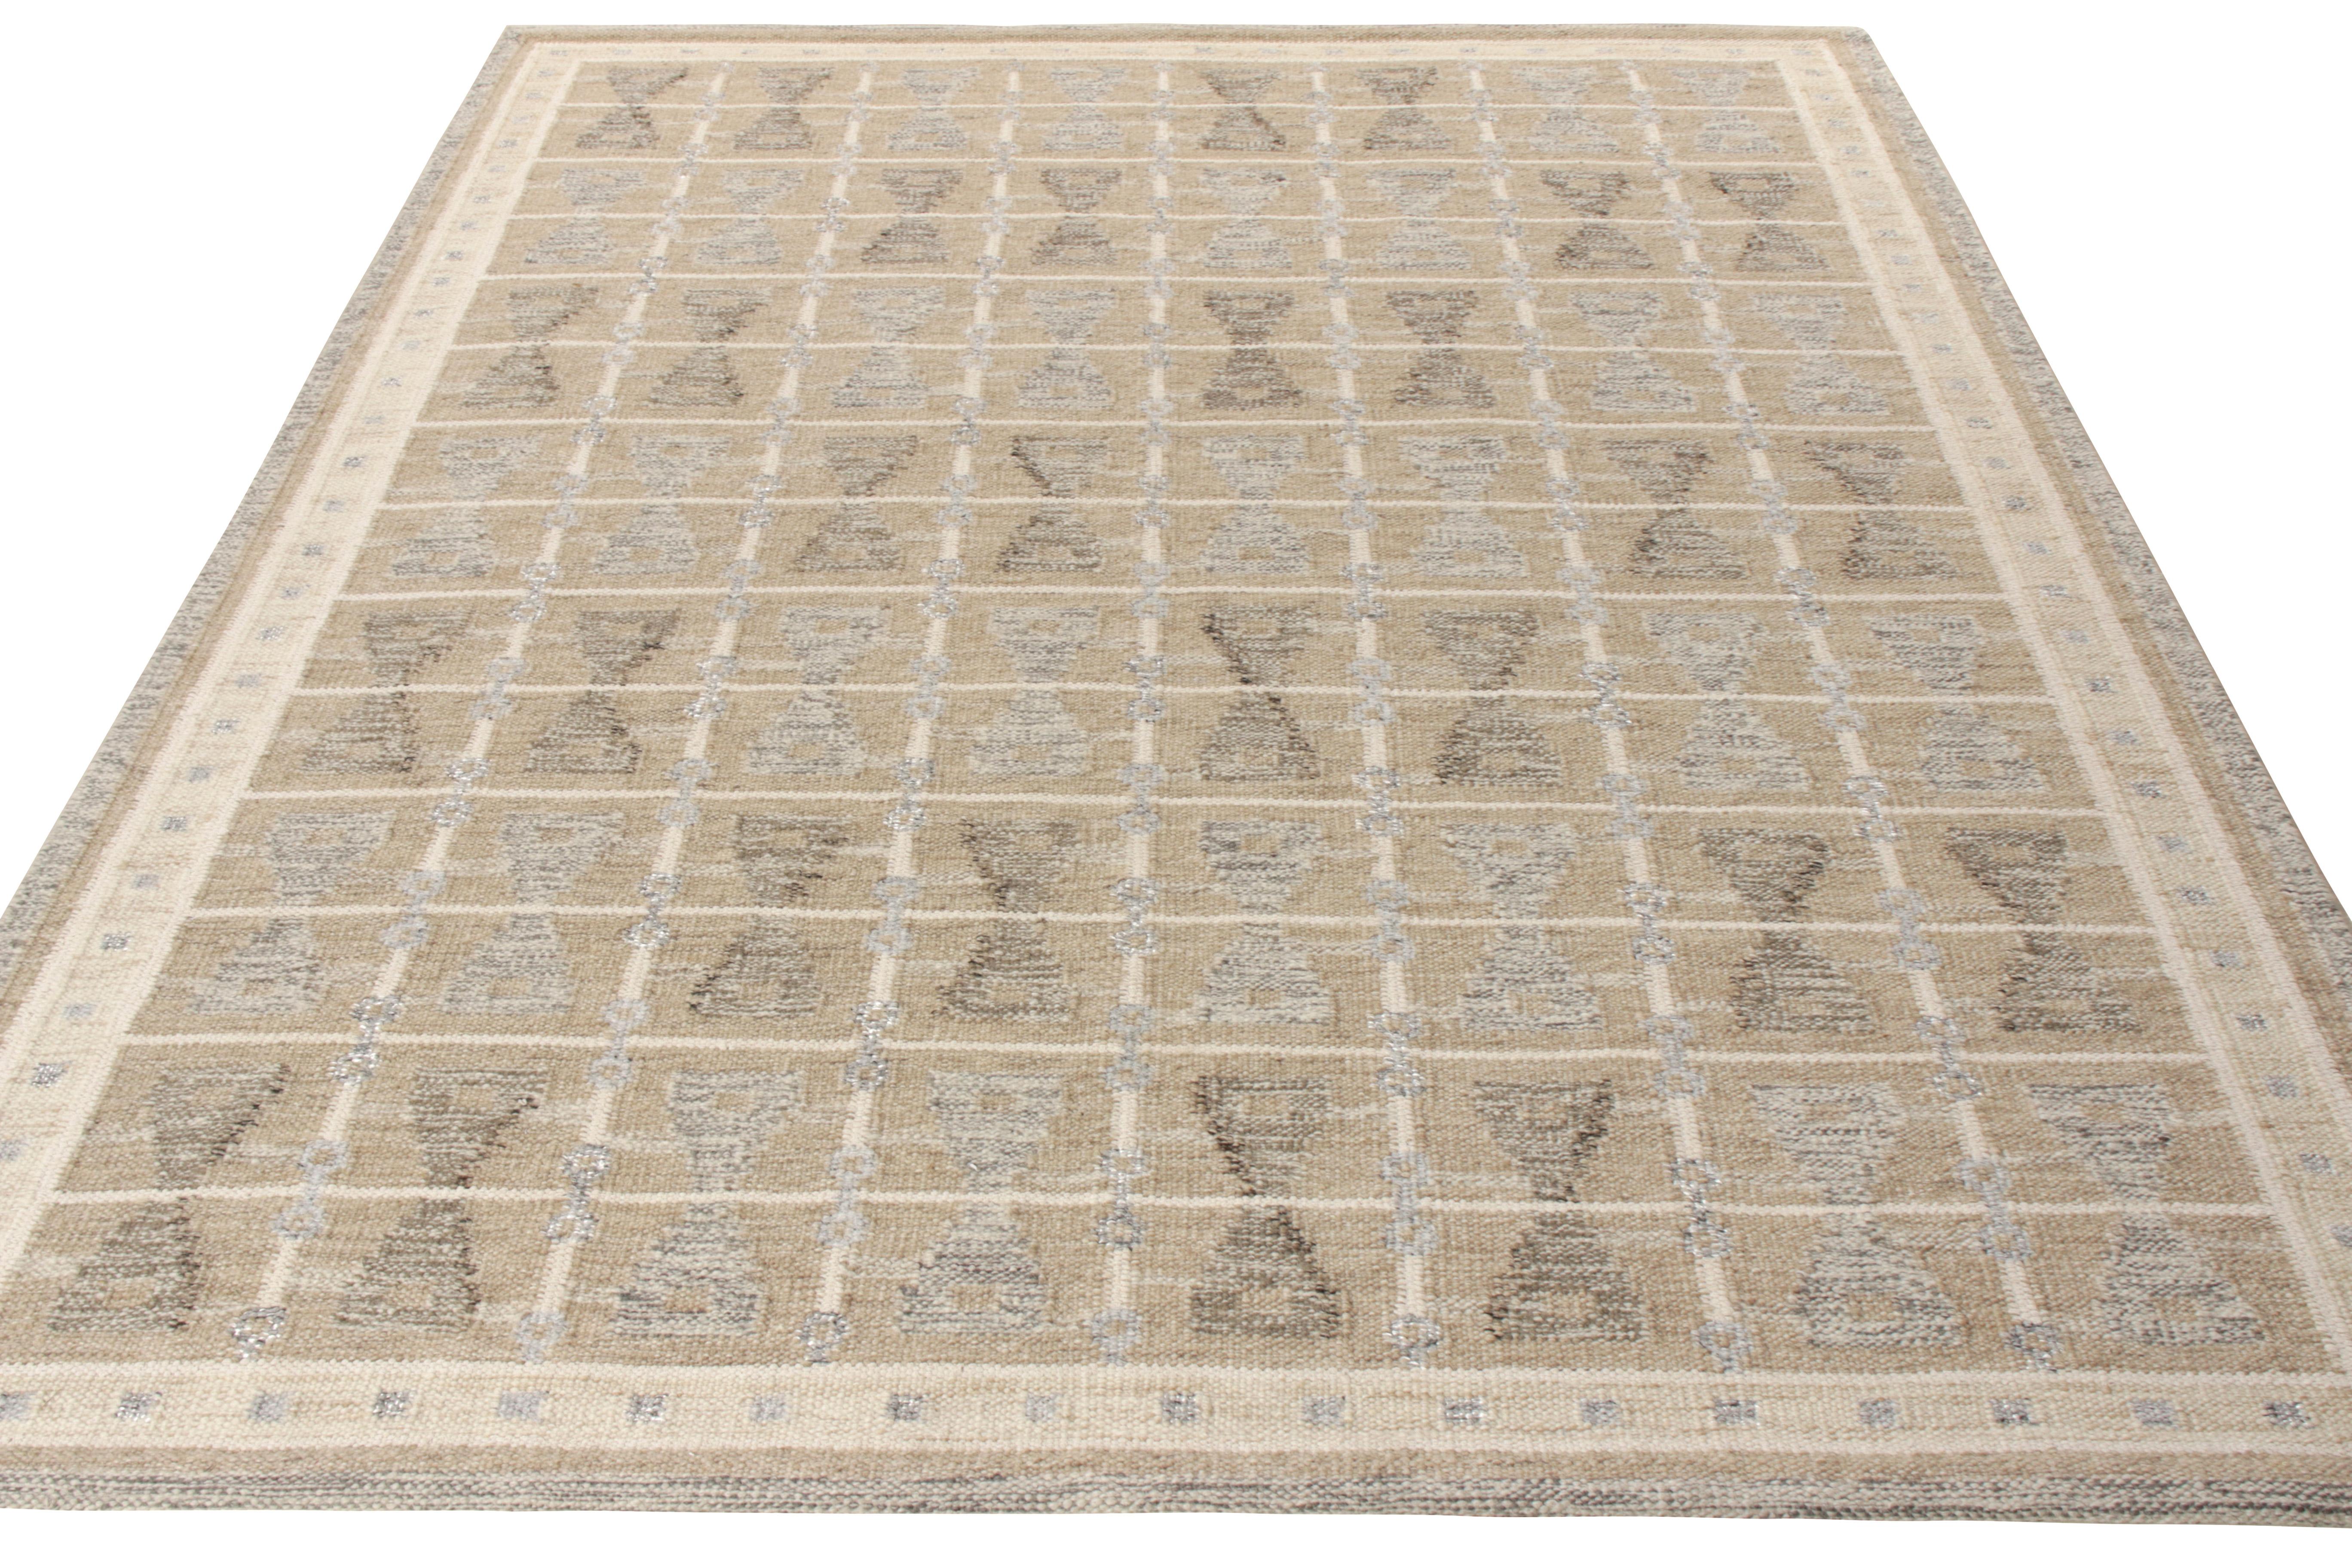 A 8x10 addition to Rug & Kilim’s award-winning Scandinavian flat weave collection. Featuring a symmetric geometric pattern in beige-brown, white and gray, the rug enjoys a scintillating sense of movement with a visually arresting appeal in this